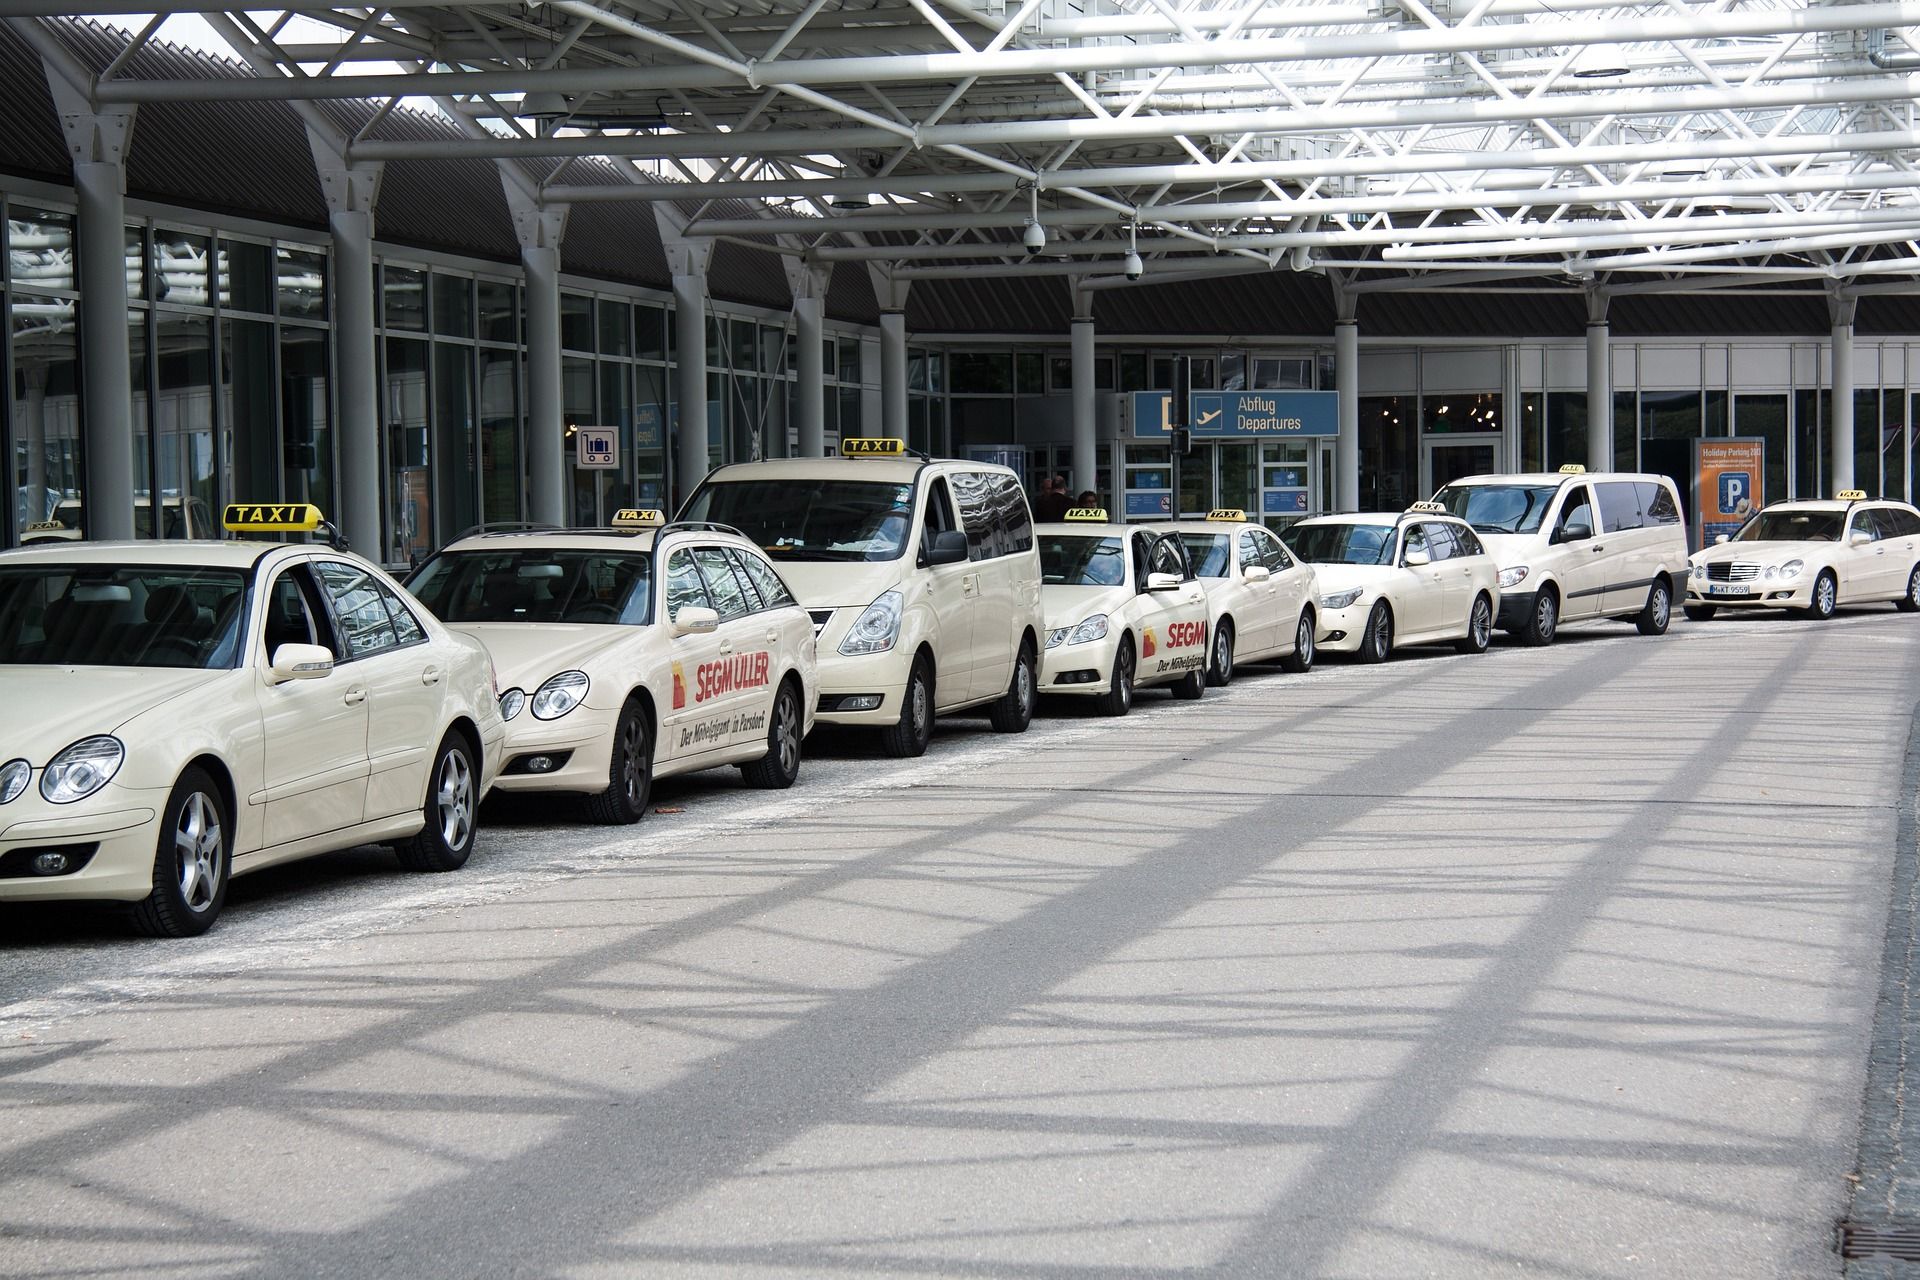 Taxi stand outside an airport